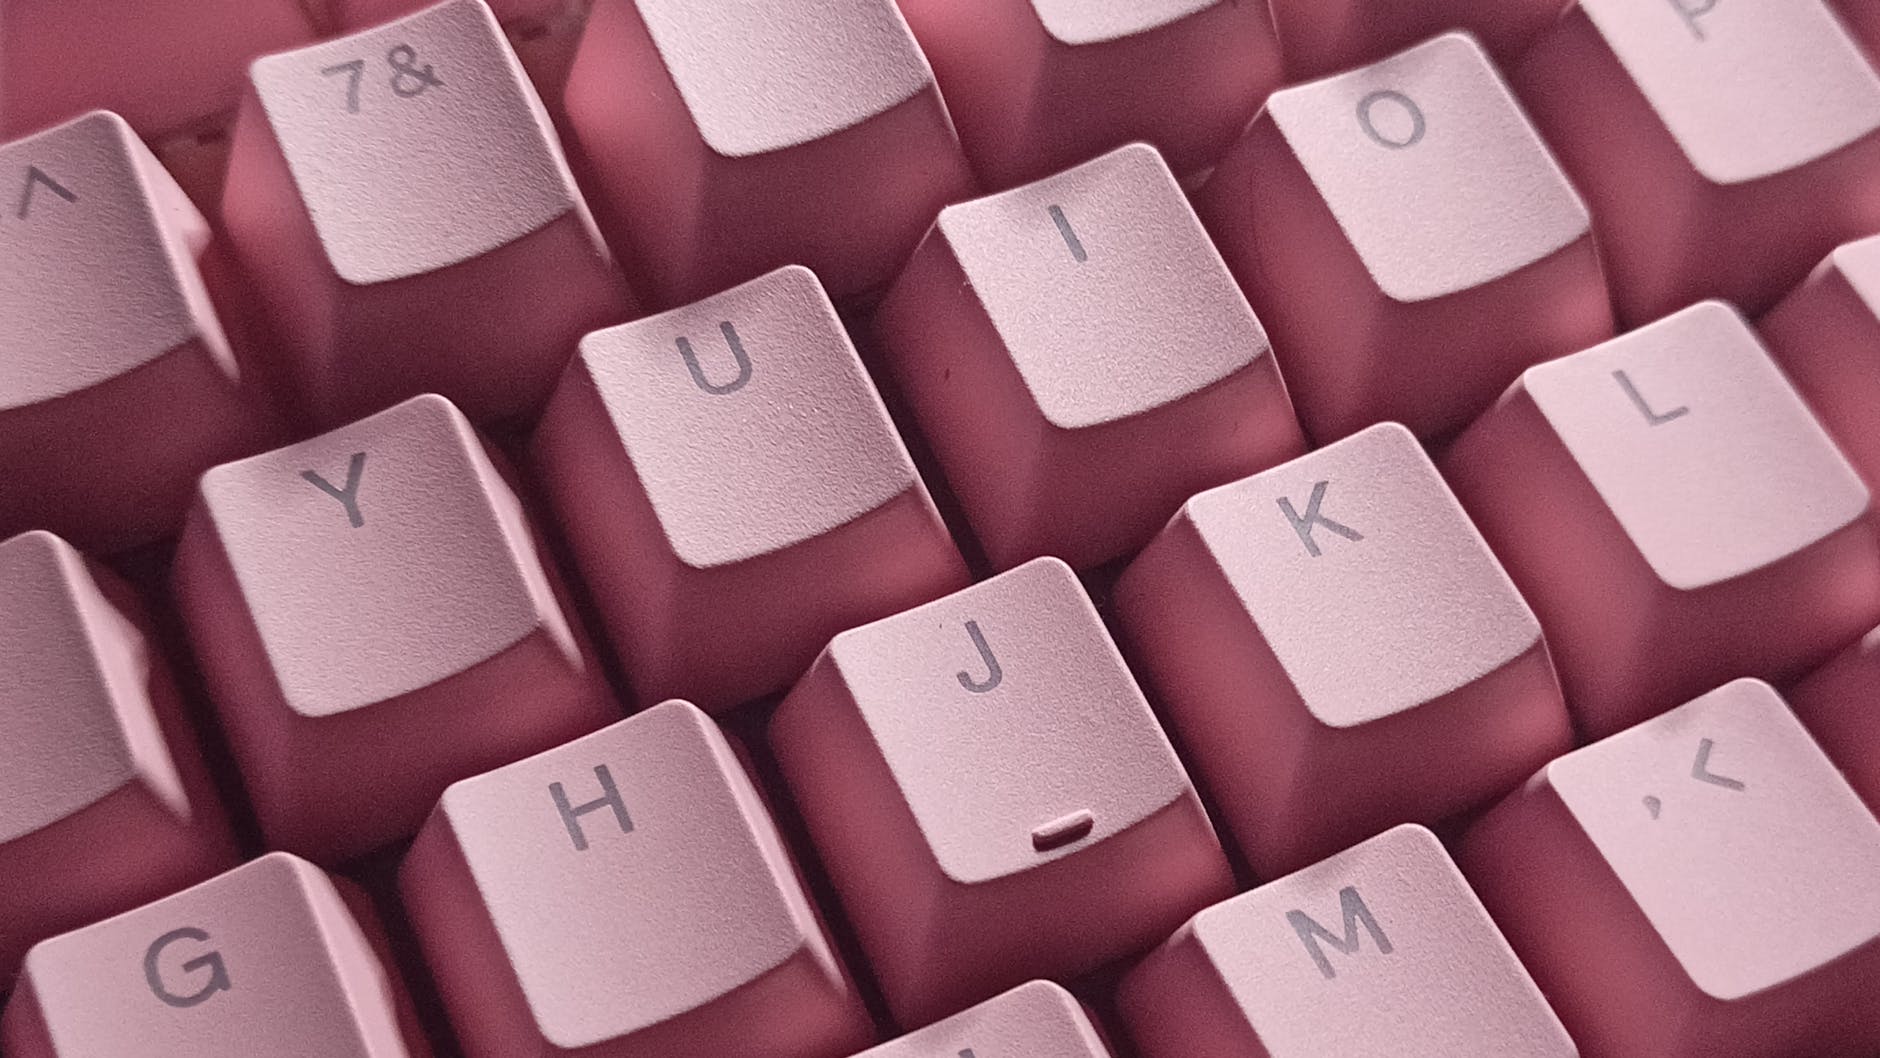 Photo of a pink keyboard by riko on Pexels.co